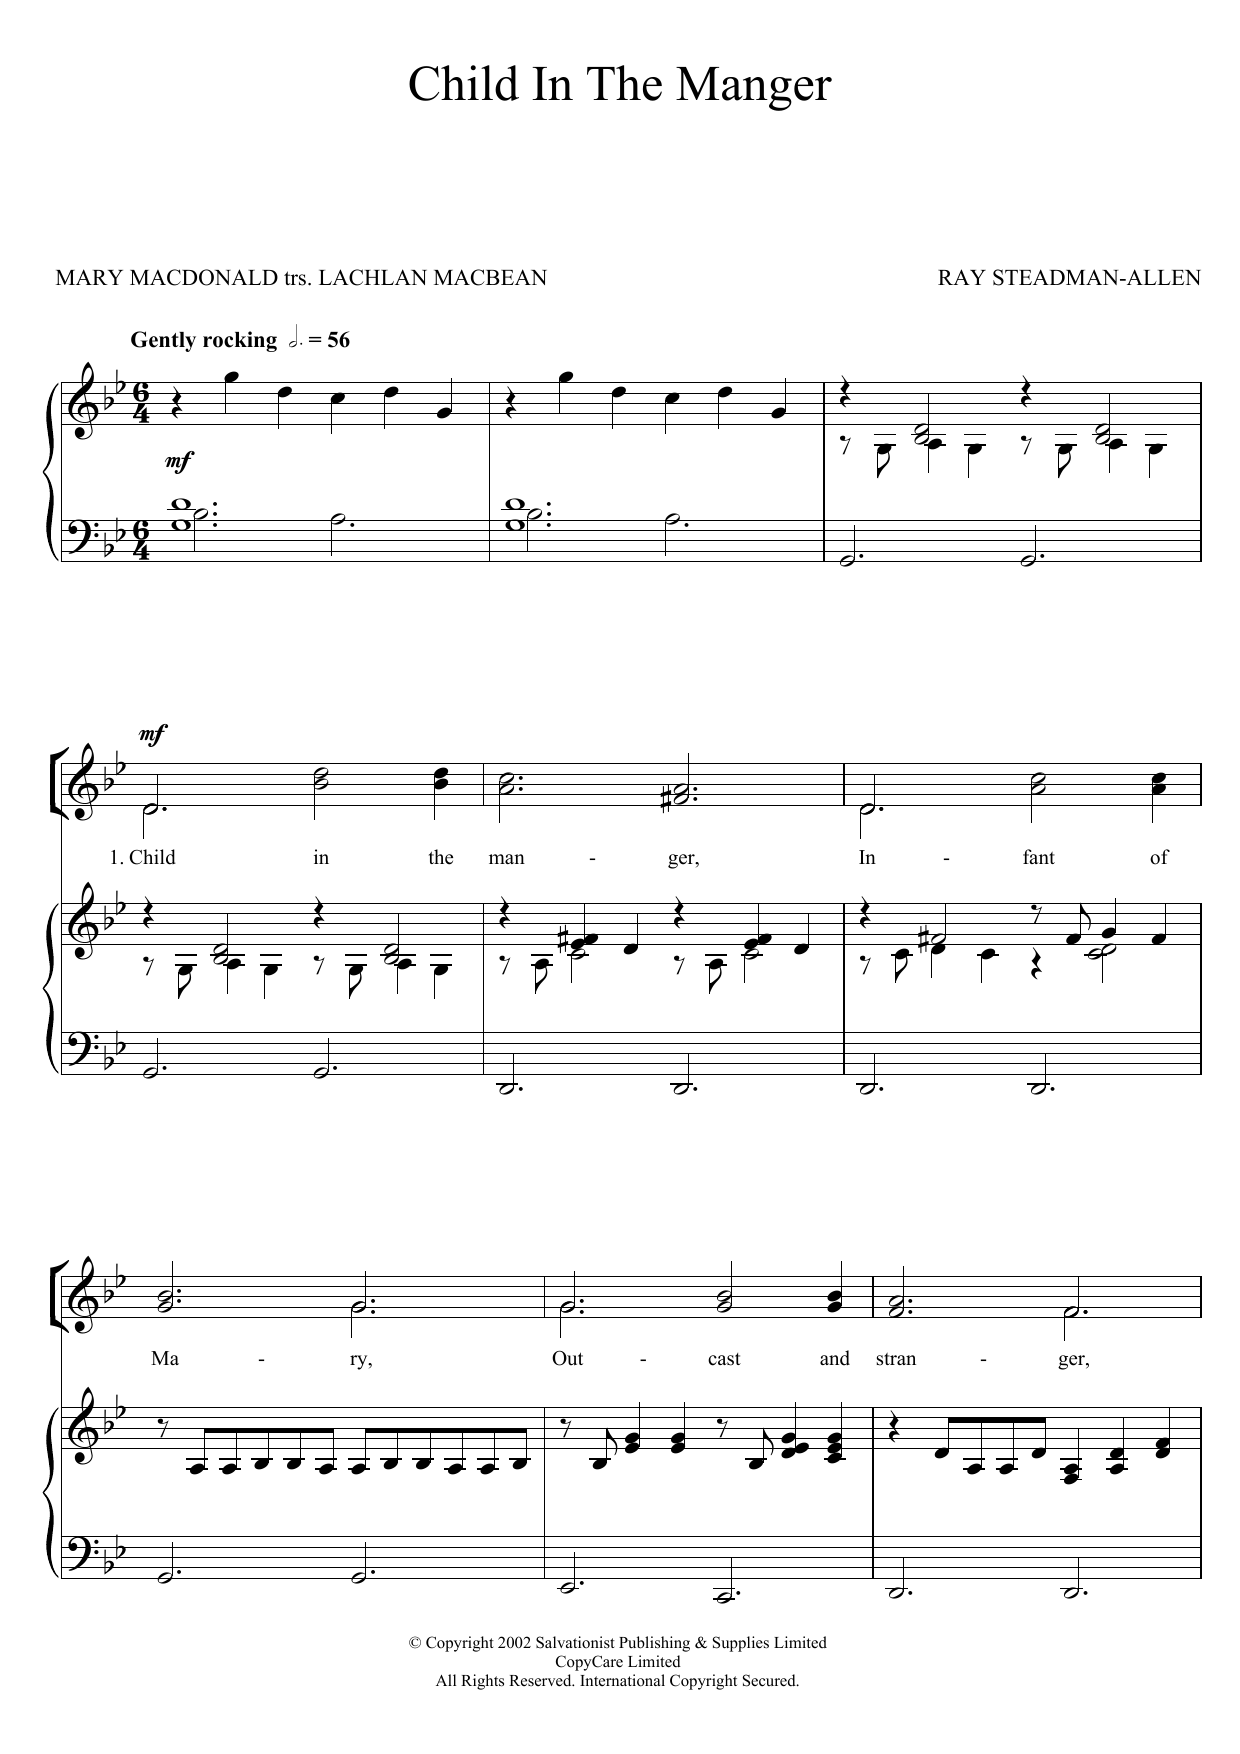 Download The Salvation Army Child In The Manger Sheet Music